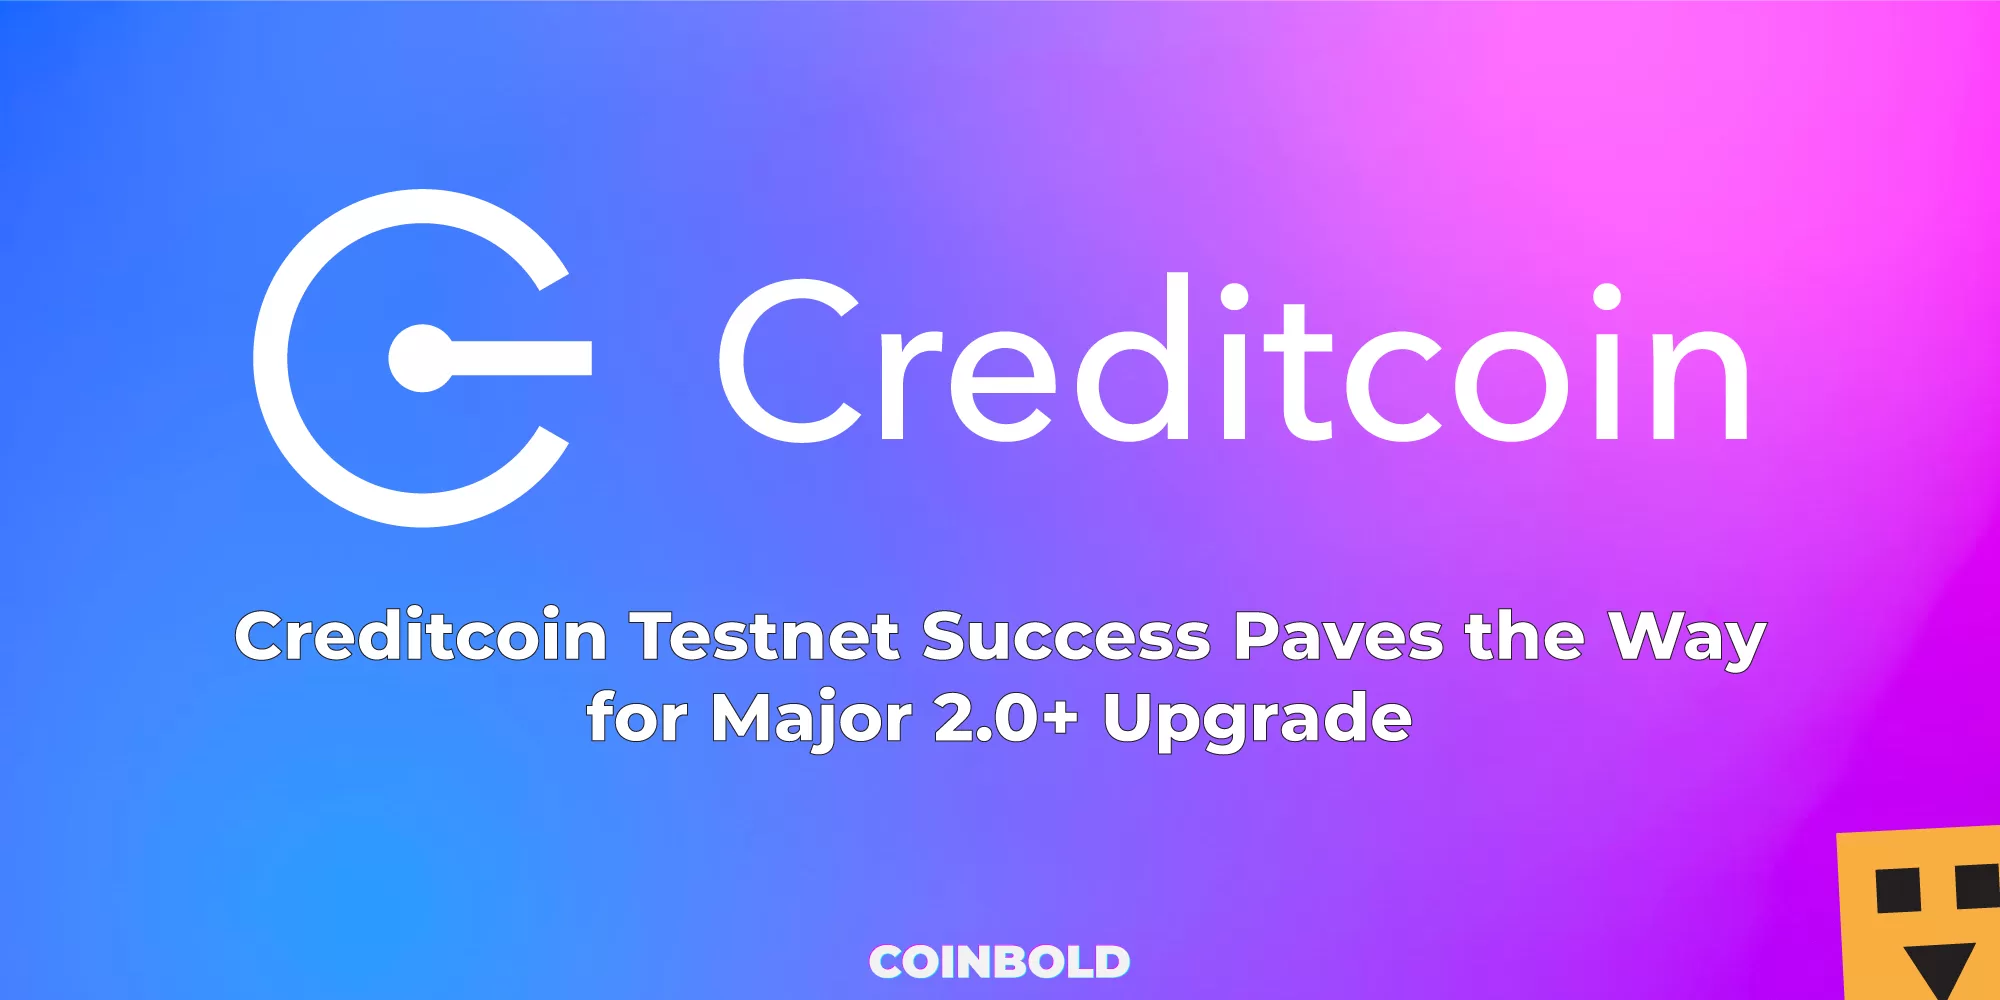 Creditcoin Testnet Success Paves the Way for Major 2.0+ Upgrade